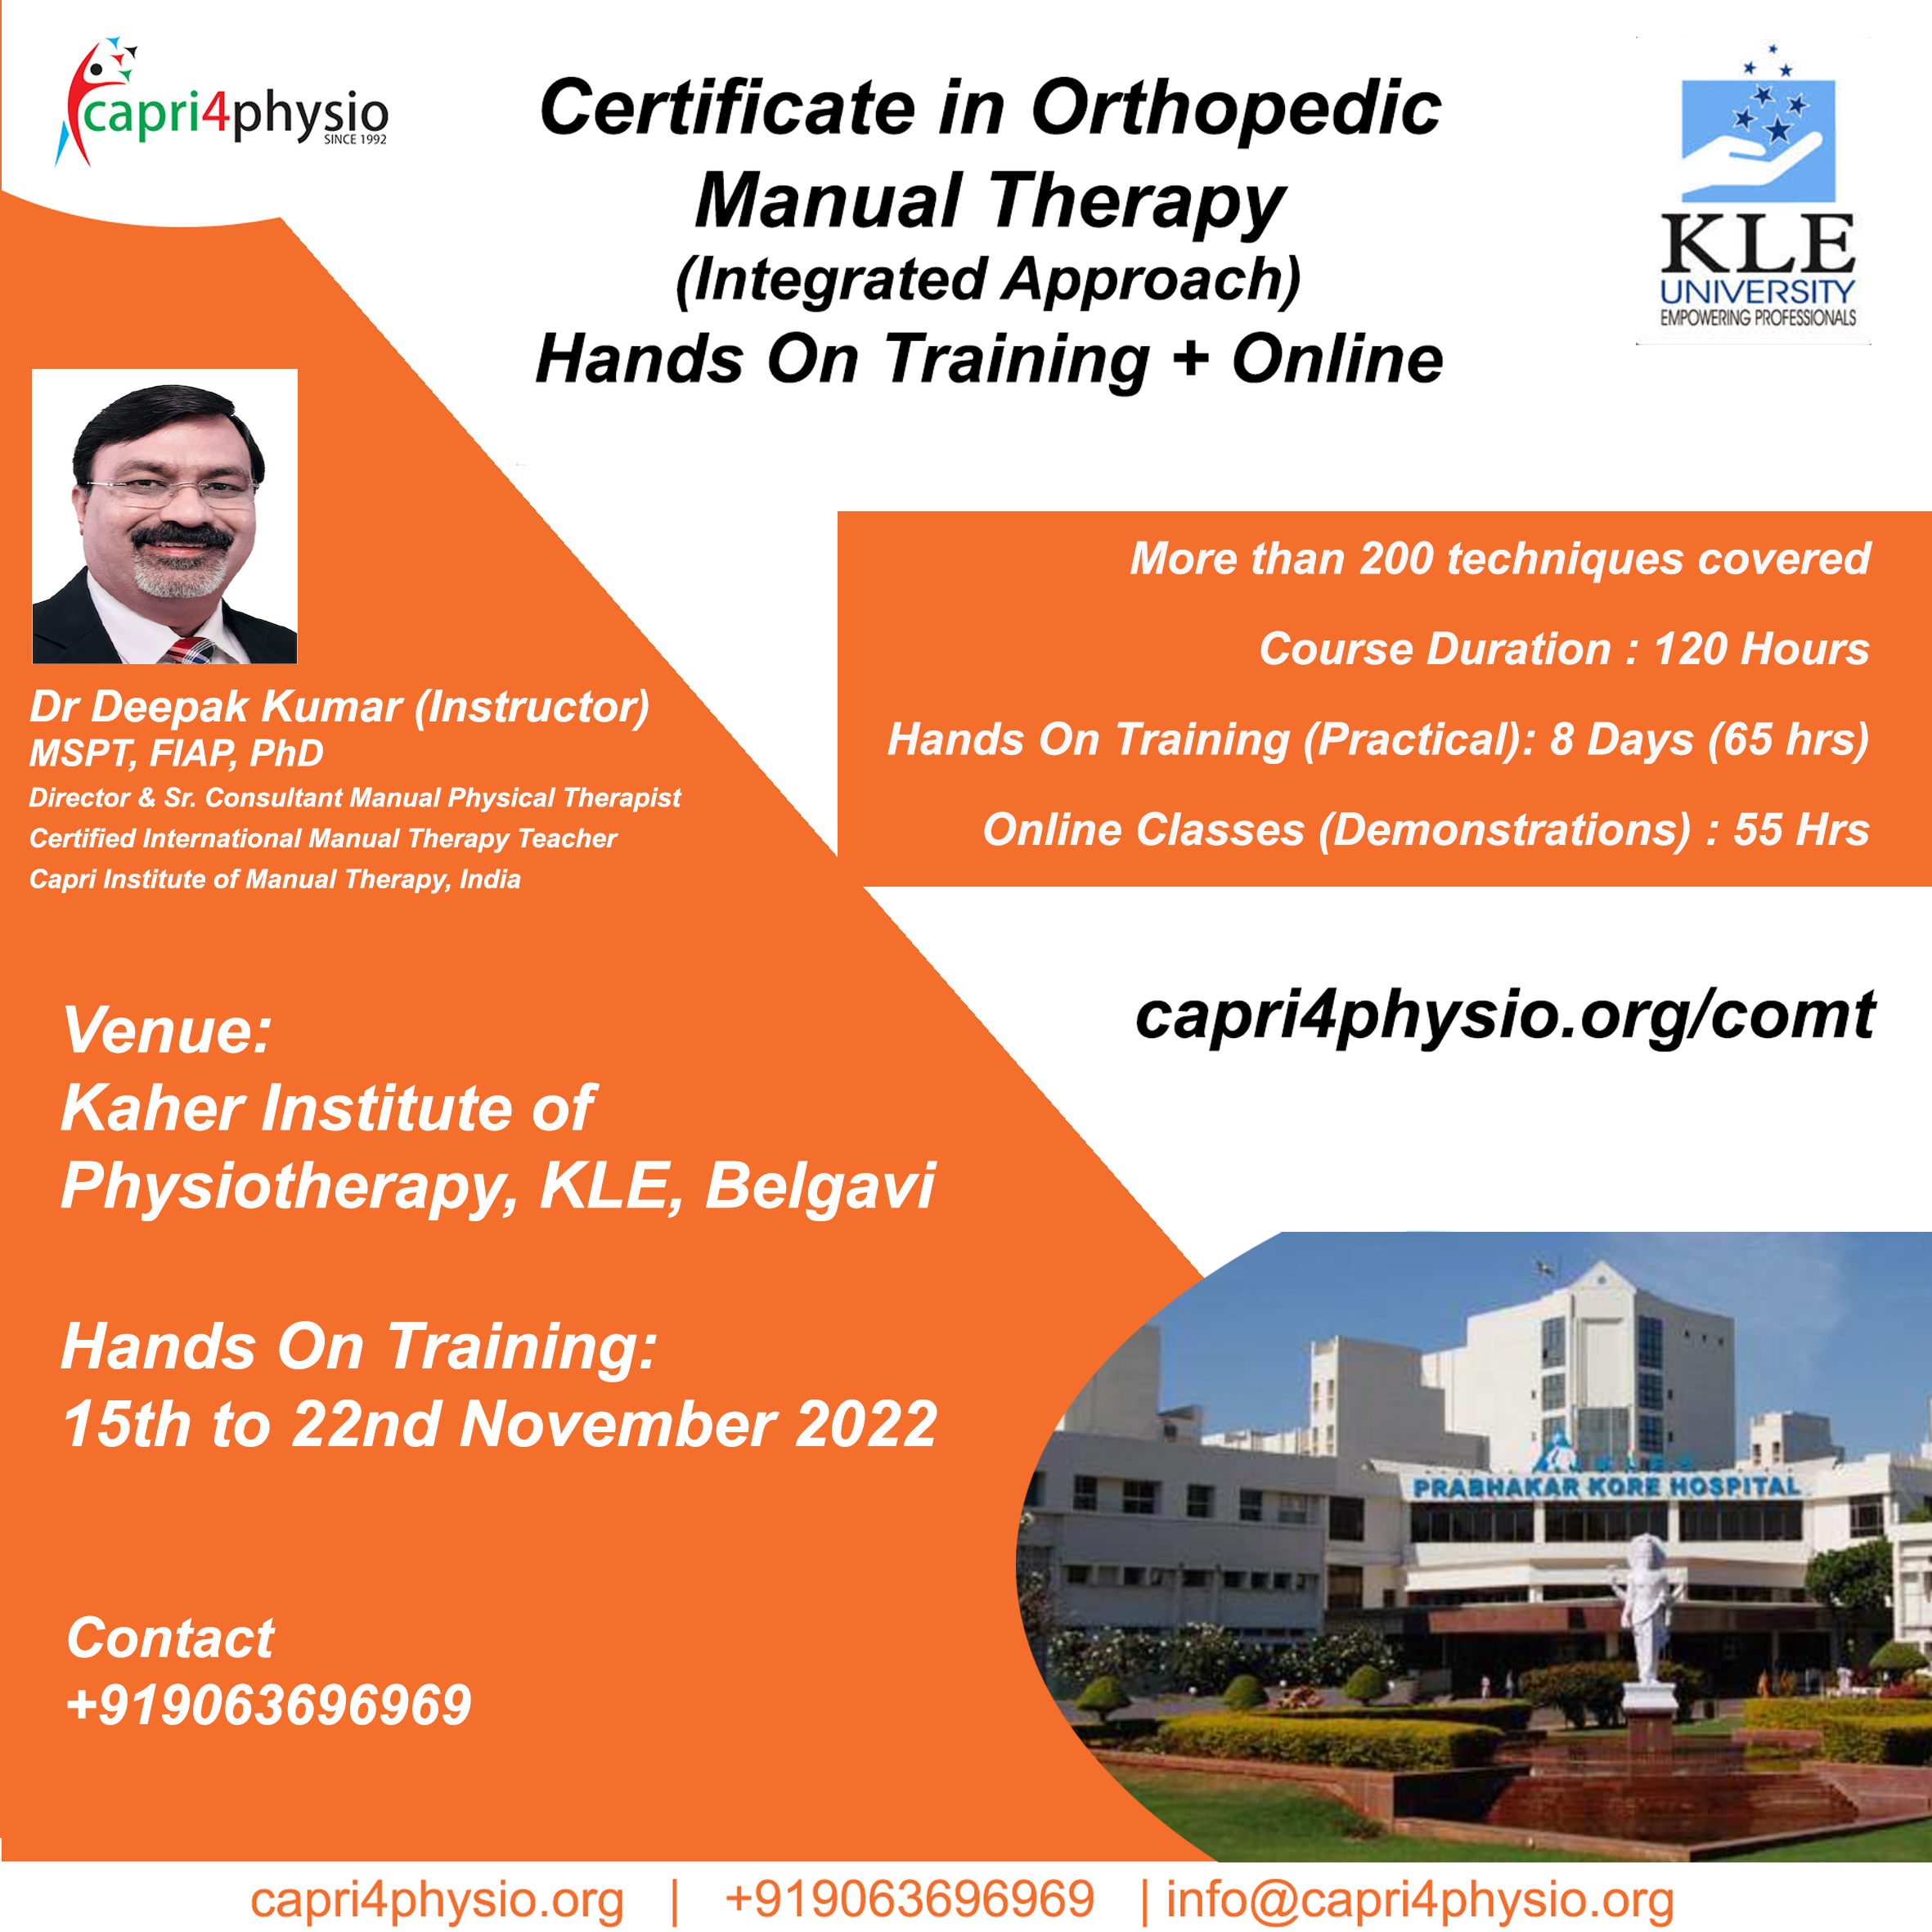 KLE : Certificate in Orthopaedic Manual Therapy (Hands On + Online)